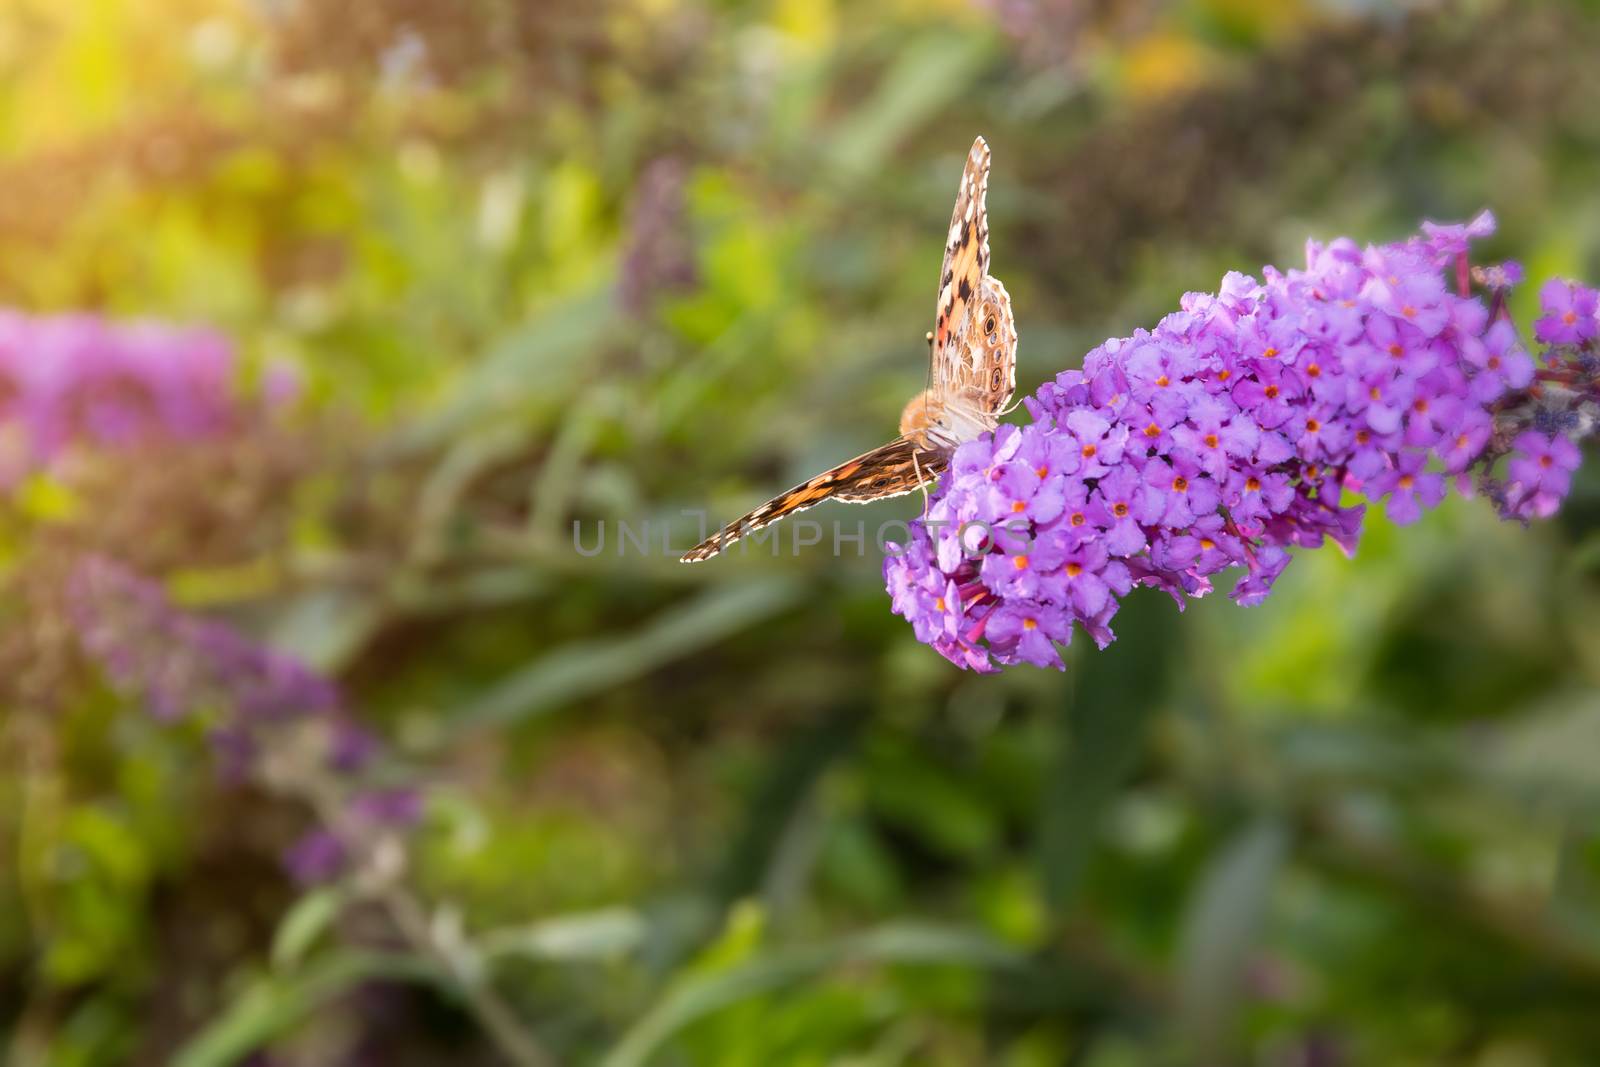 Painted Lady butterfly, Vanessa cardui, feeding on nectar from buddleia flower lit by afternoon sun.